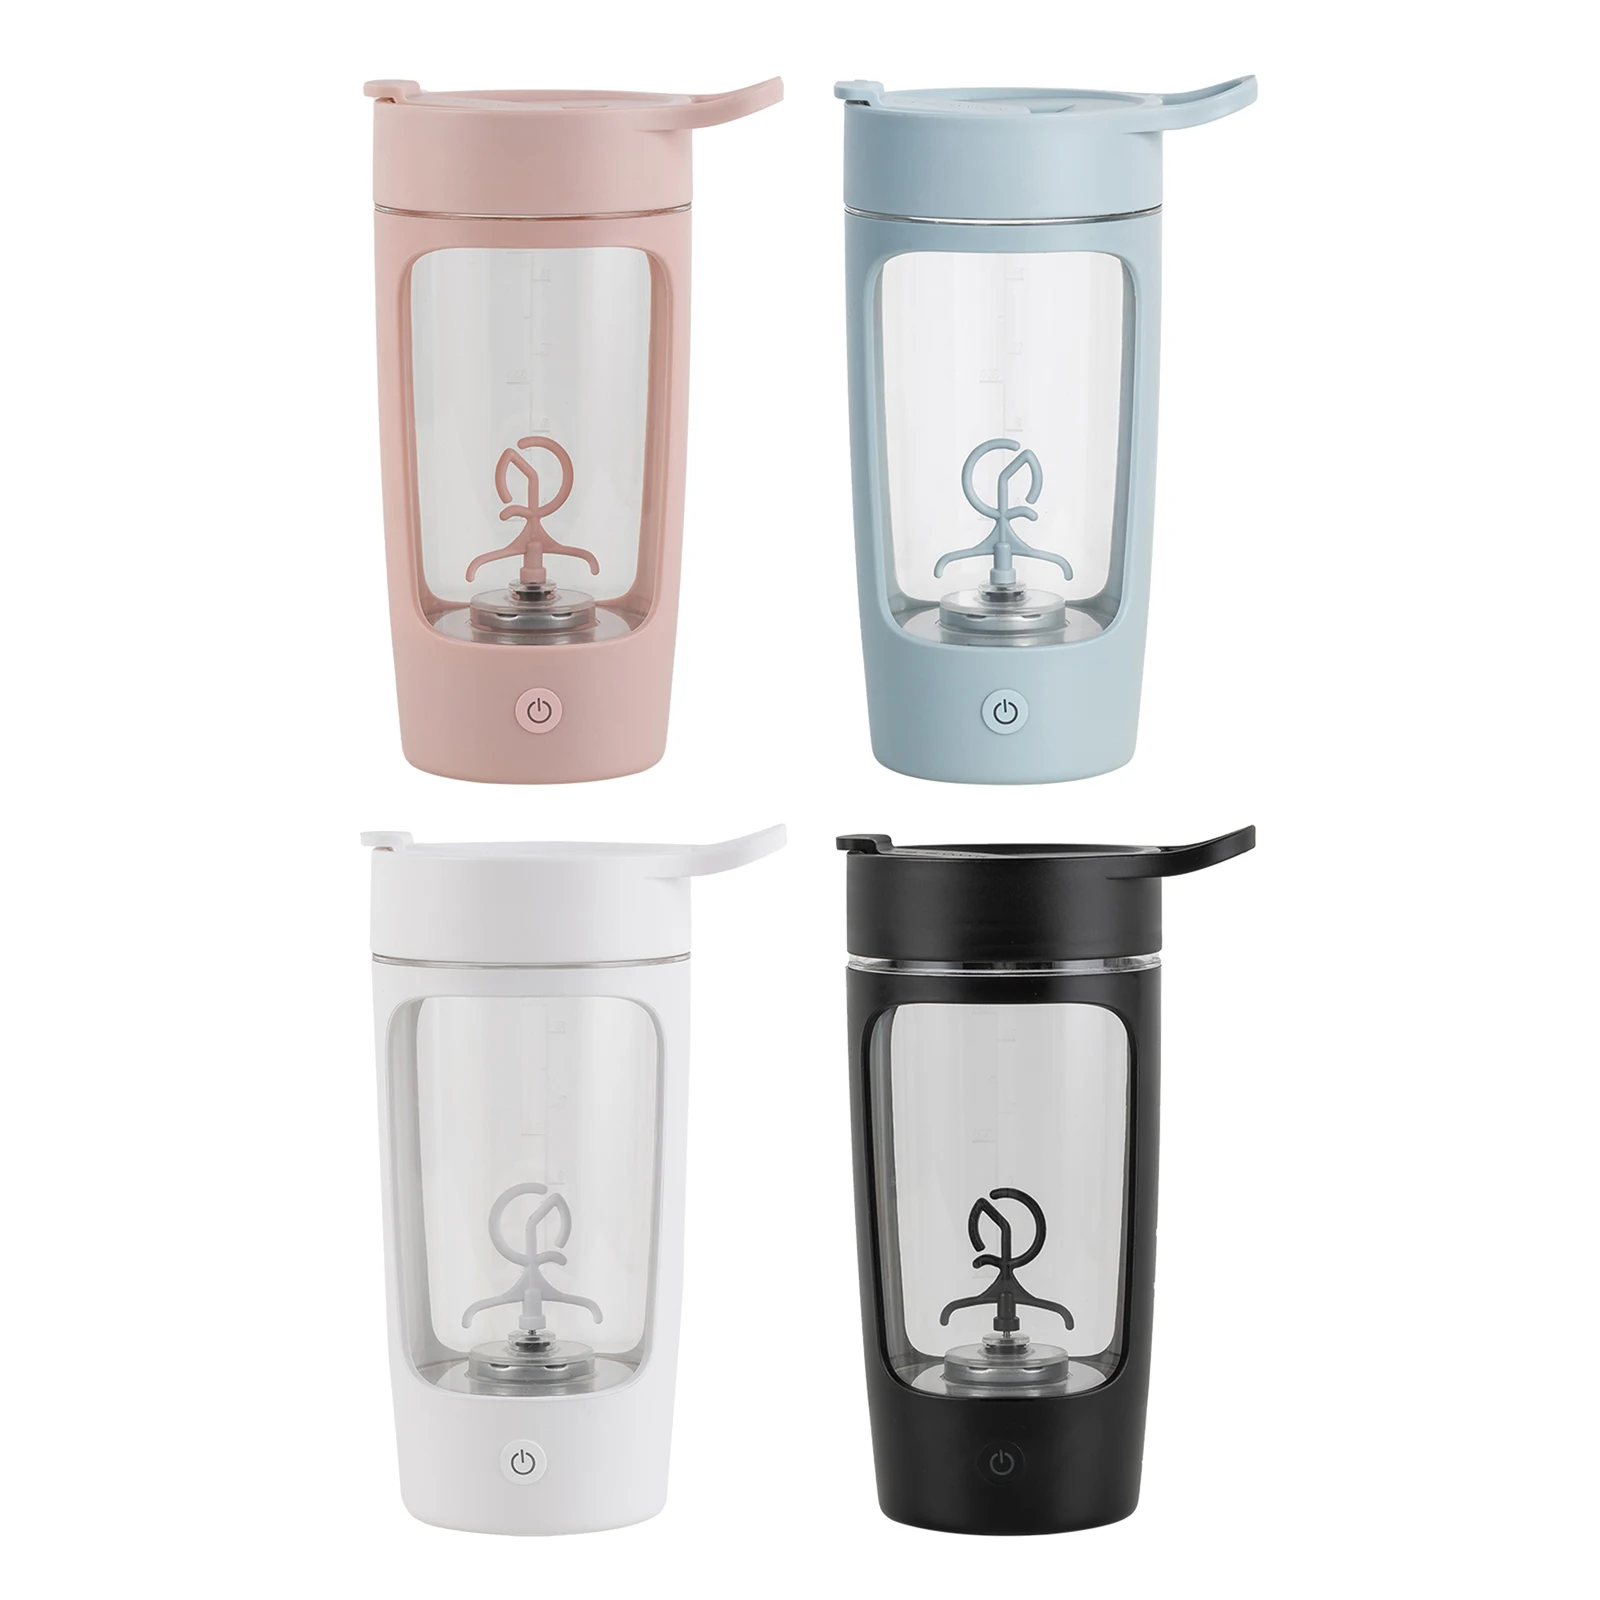 Automatic Protein Shaker Bottle Shaker Cups Self Stirring Shaker Bottle Shaker Mixing Tool USB Rechargeable